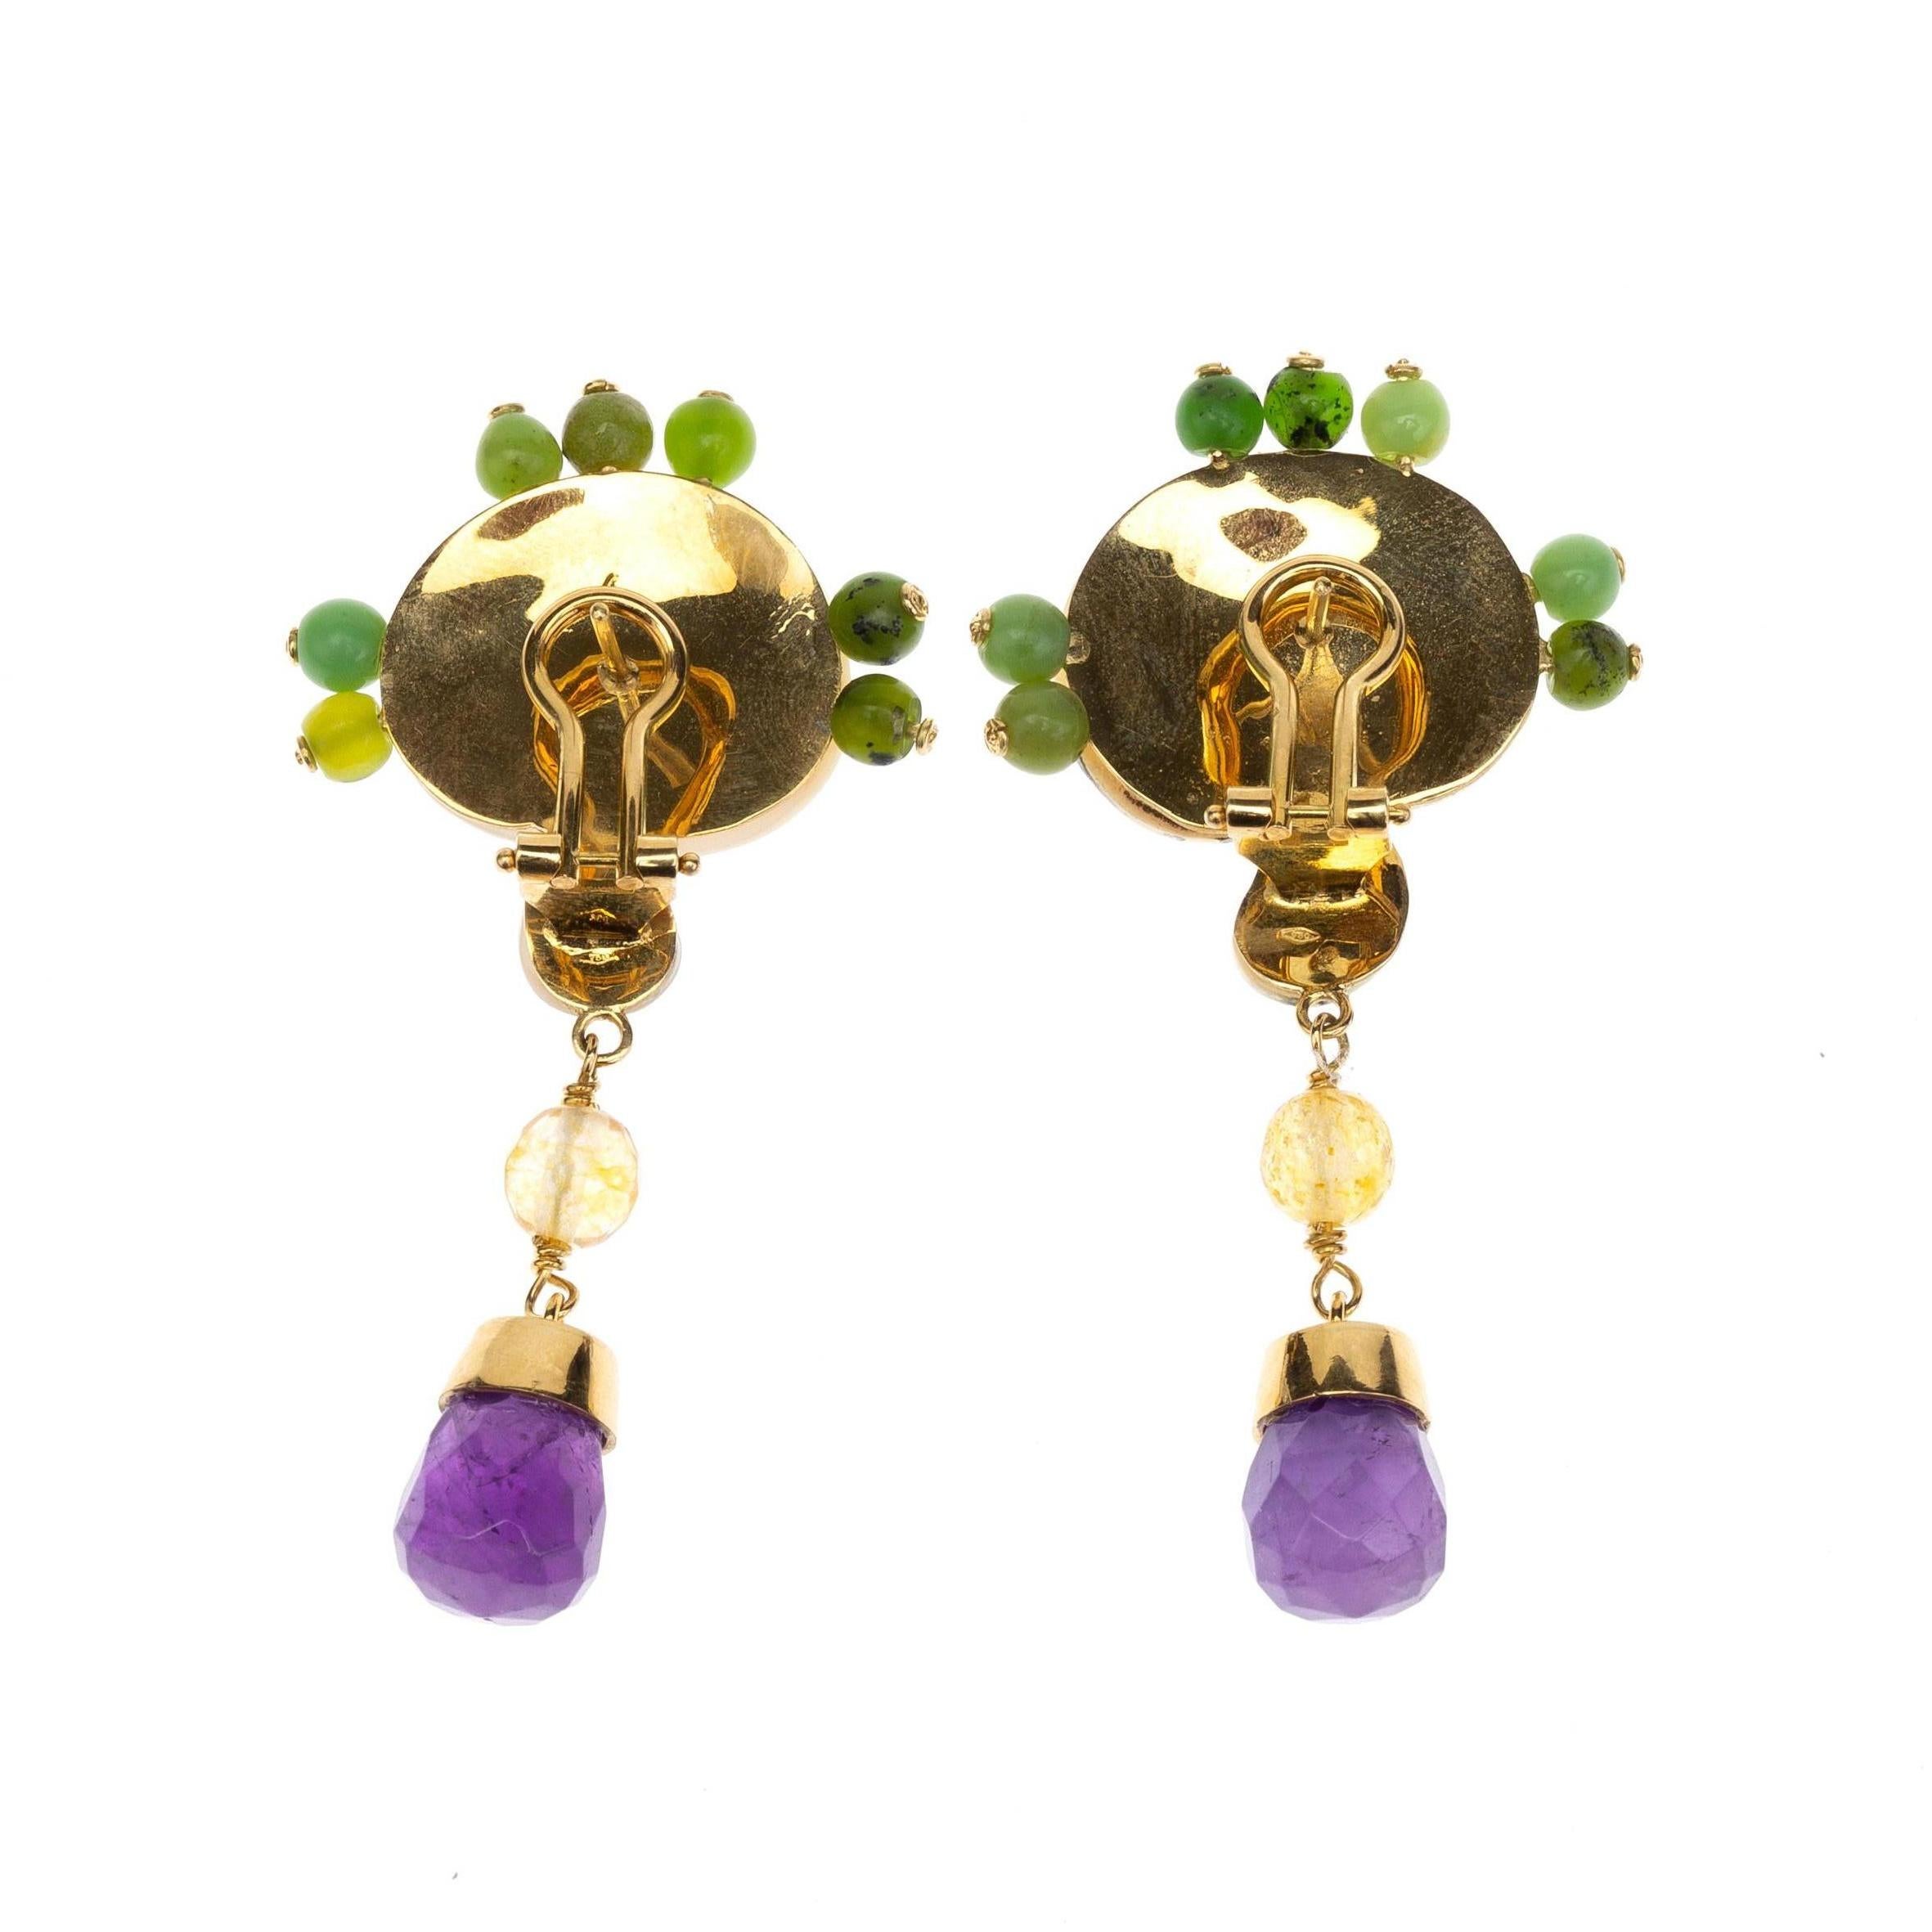 Carved Mother of Pearls mushroom Jade Amethyst Citrine 18 k Gold gr 9,40 Earrings.
All Giulia Colussi jewelry is new and has never been previously owned or worn. Each item will arrive at your door beautifully gift wrapped in our boxes, put inside an